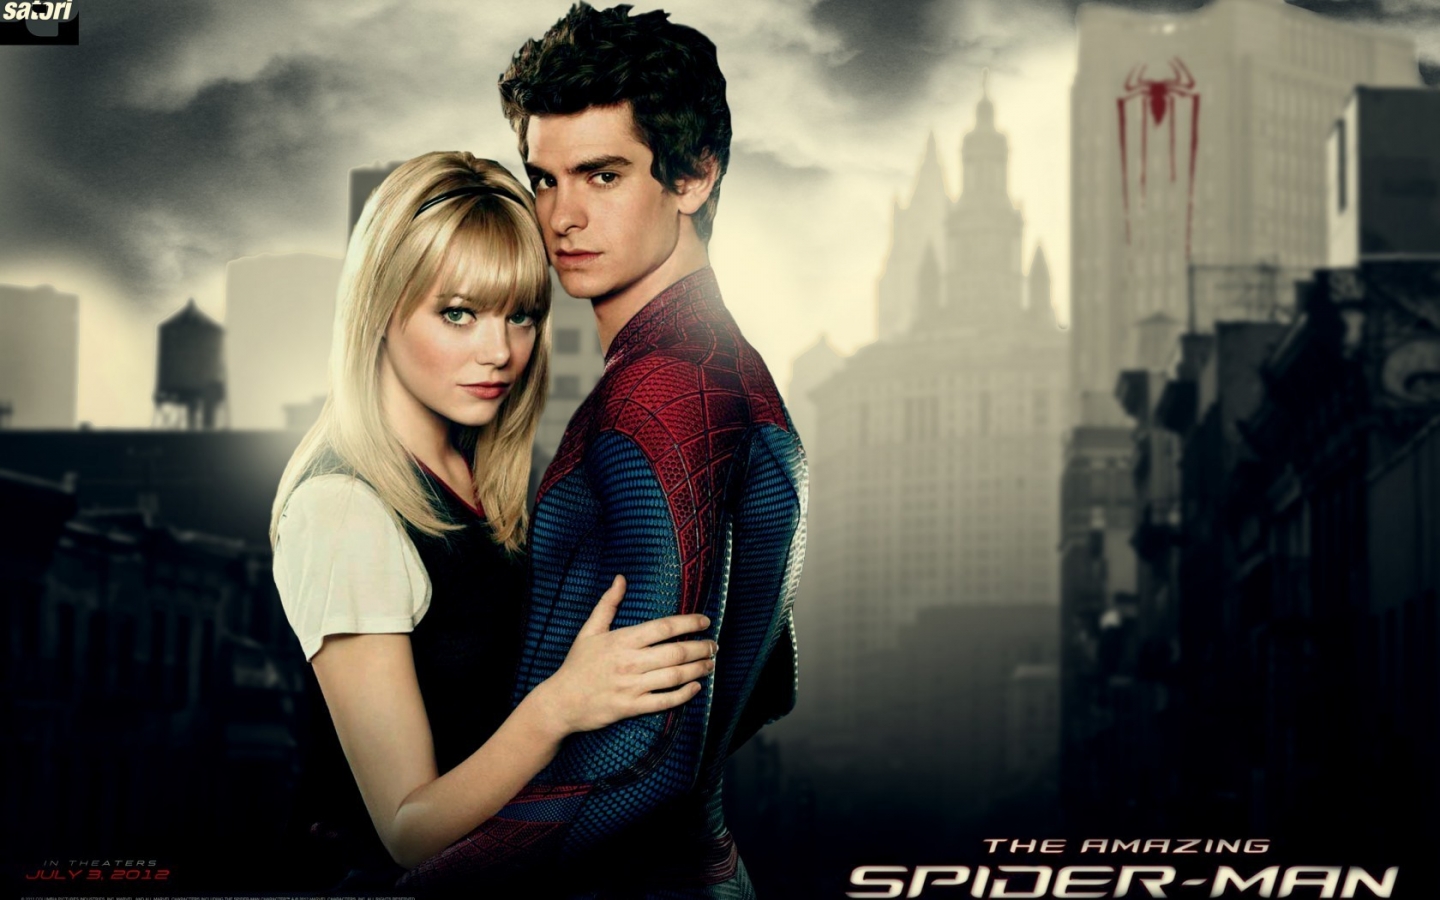 The Amazing Spider-Man Poster for 1440 x 900 widescreen resolution